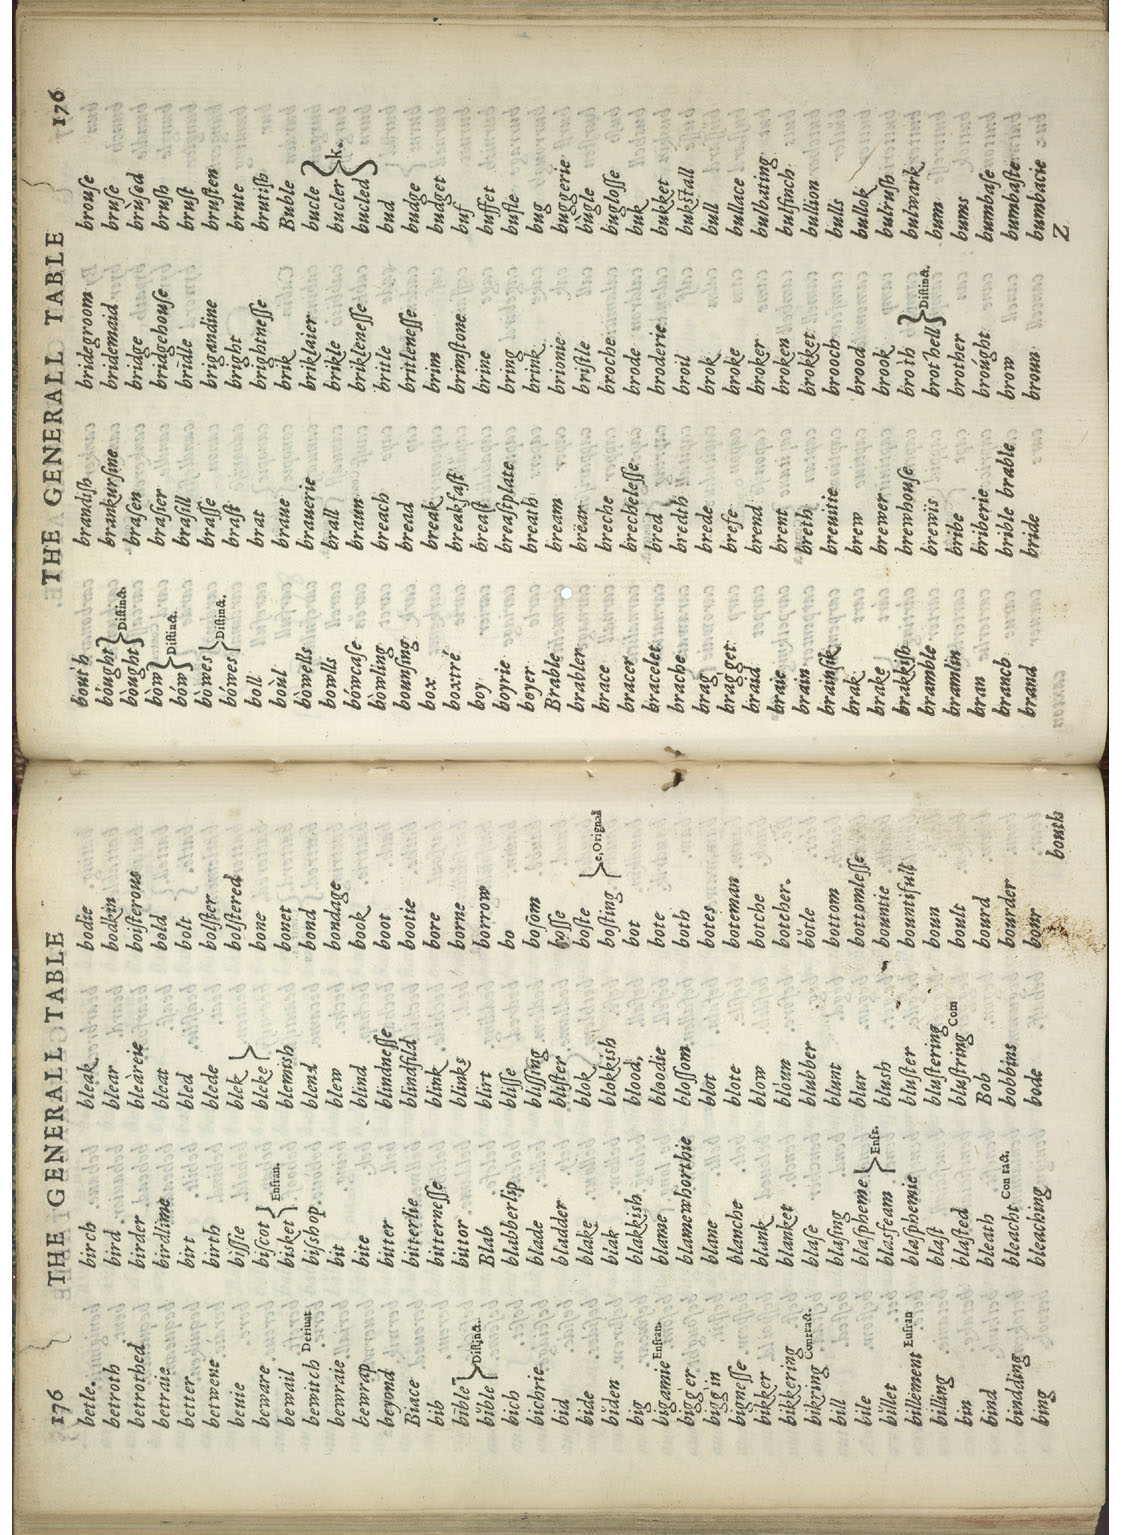 image of Mulcaster dictionary